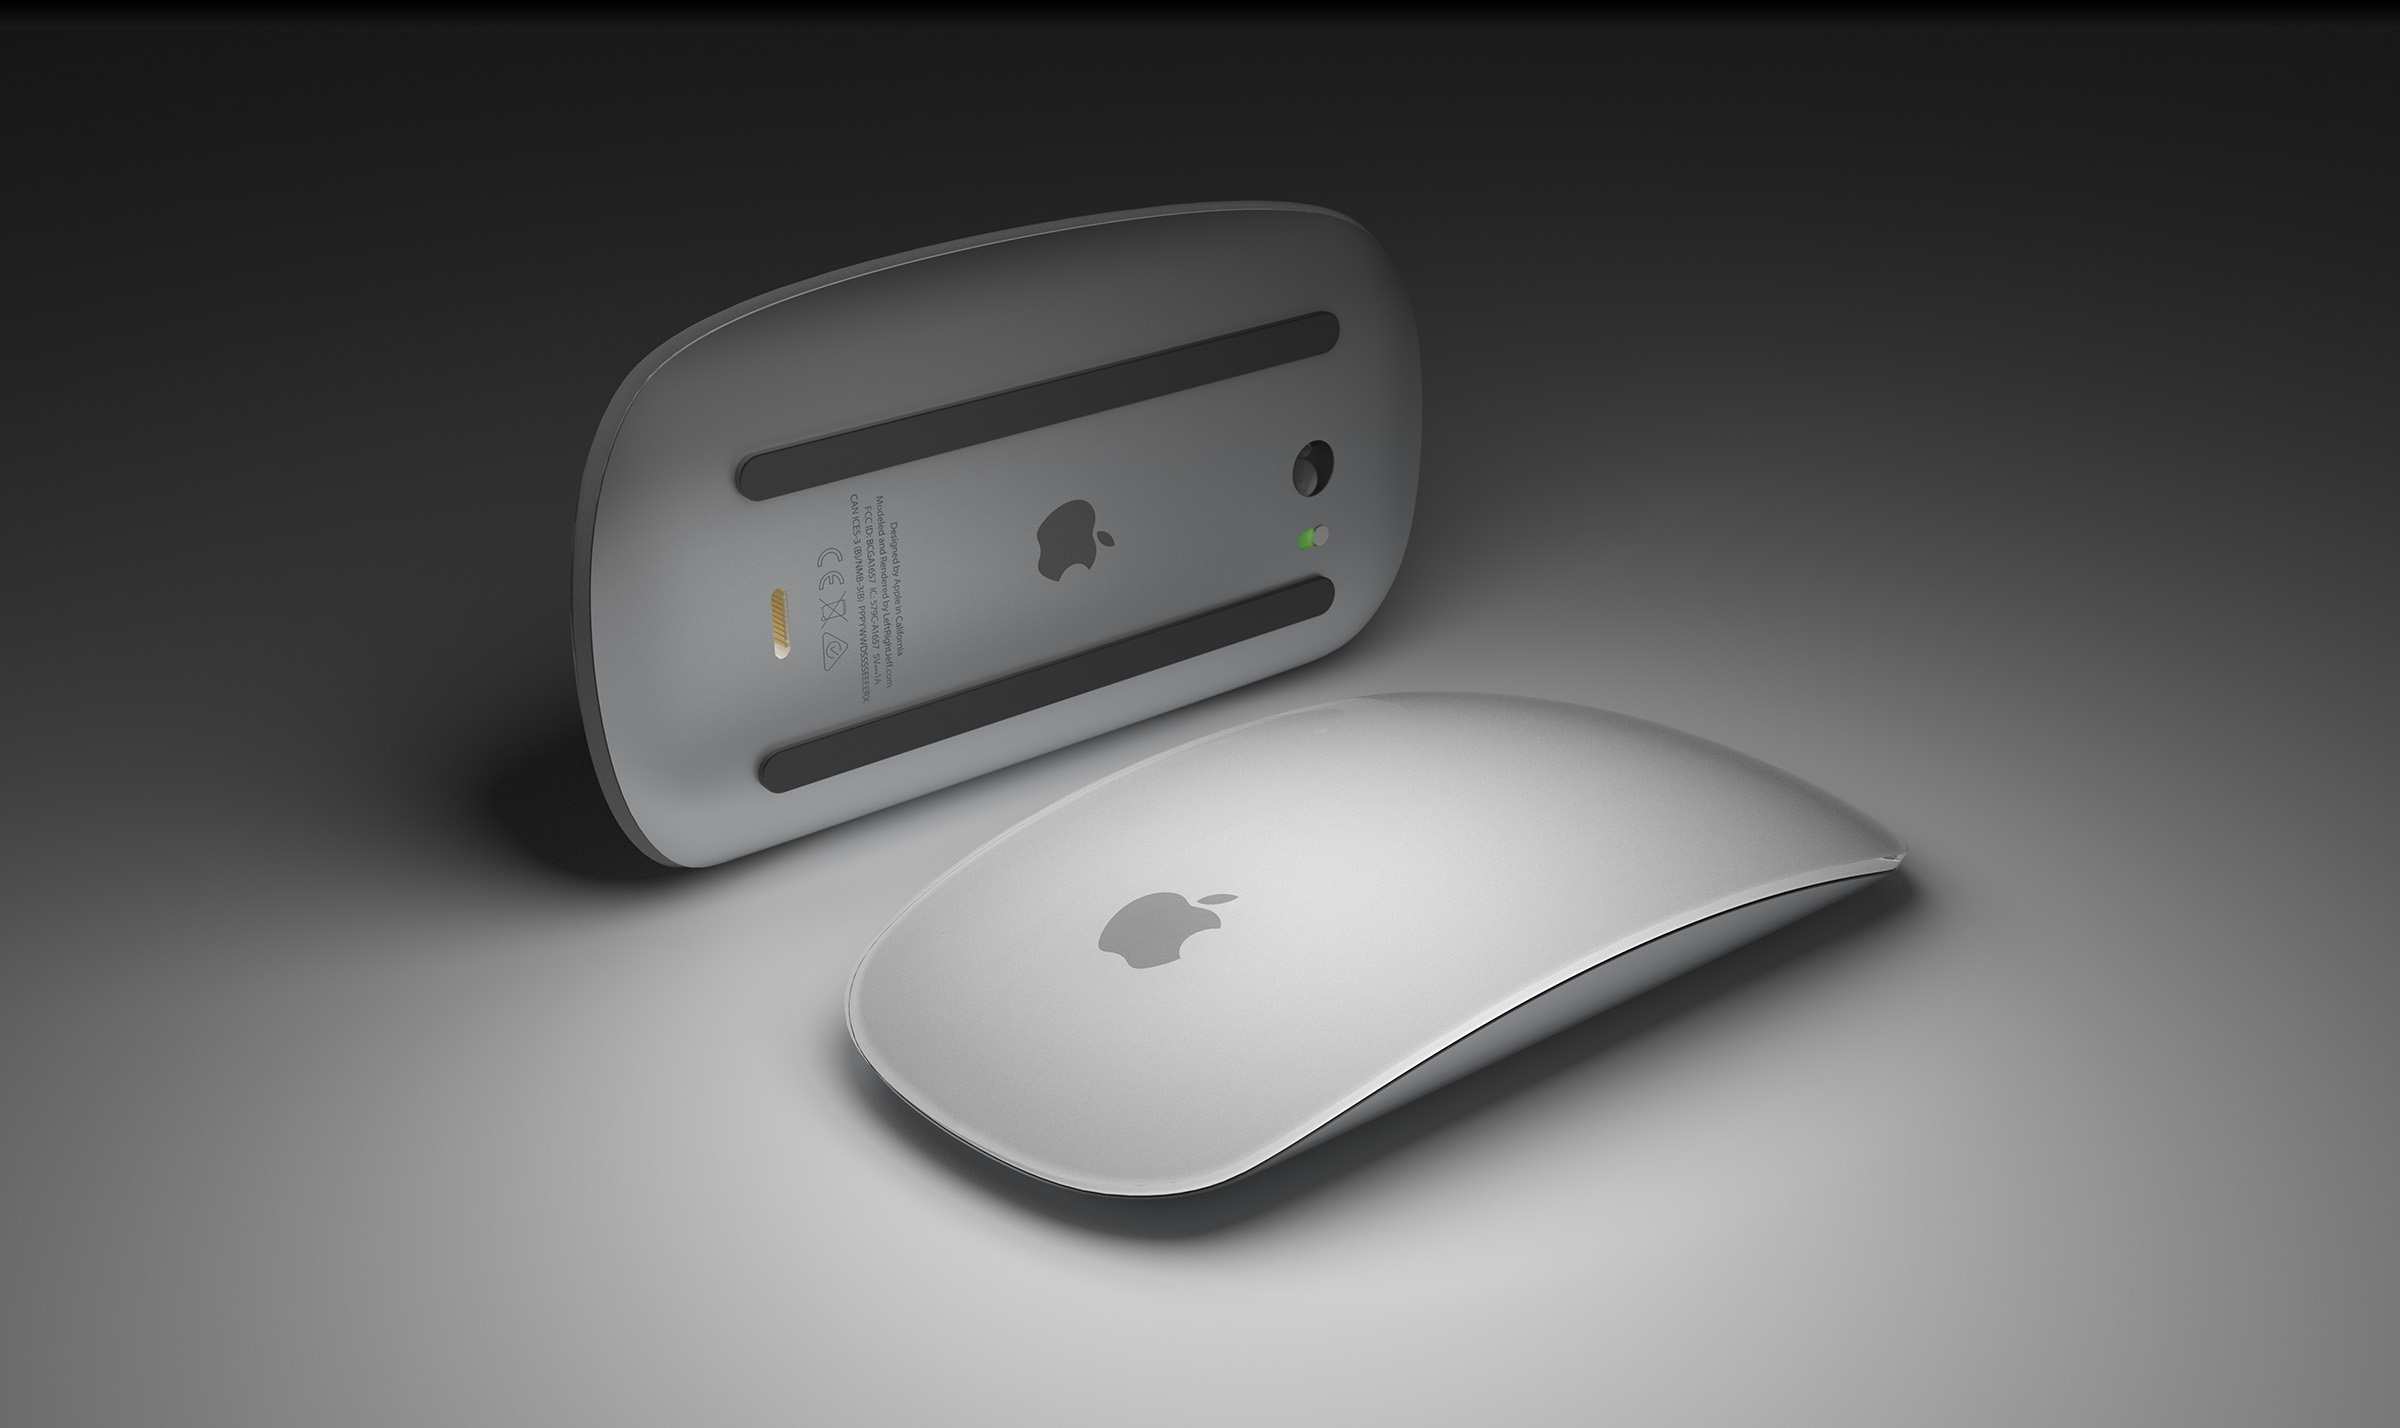 This is a 3D Apple Magic Mouse modeled and rendered by Jeff Nelson.